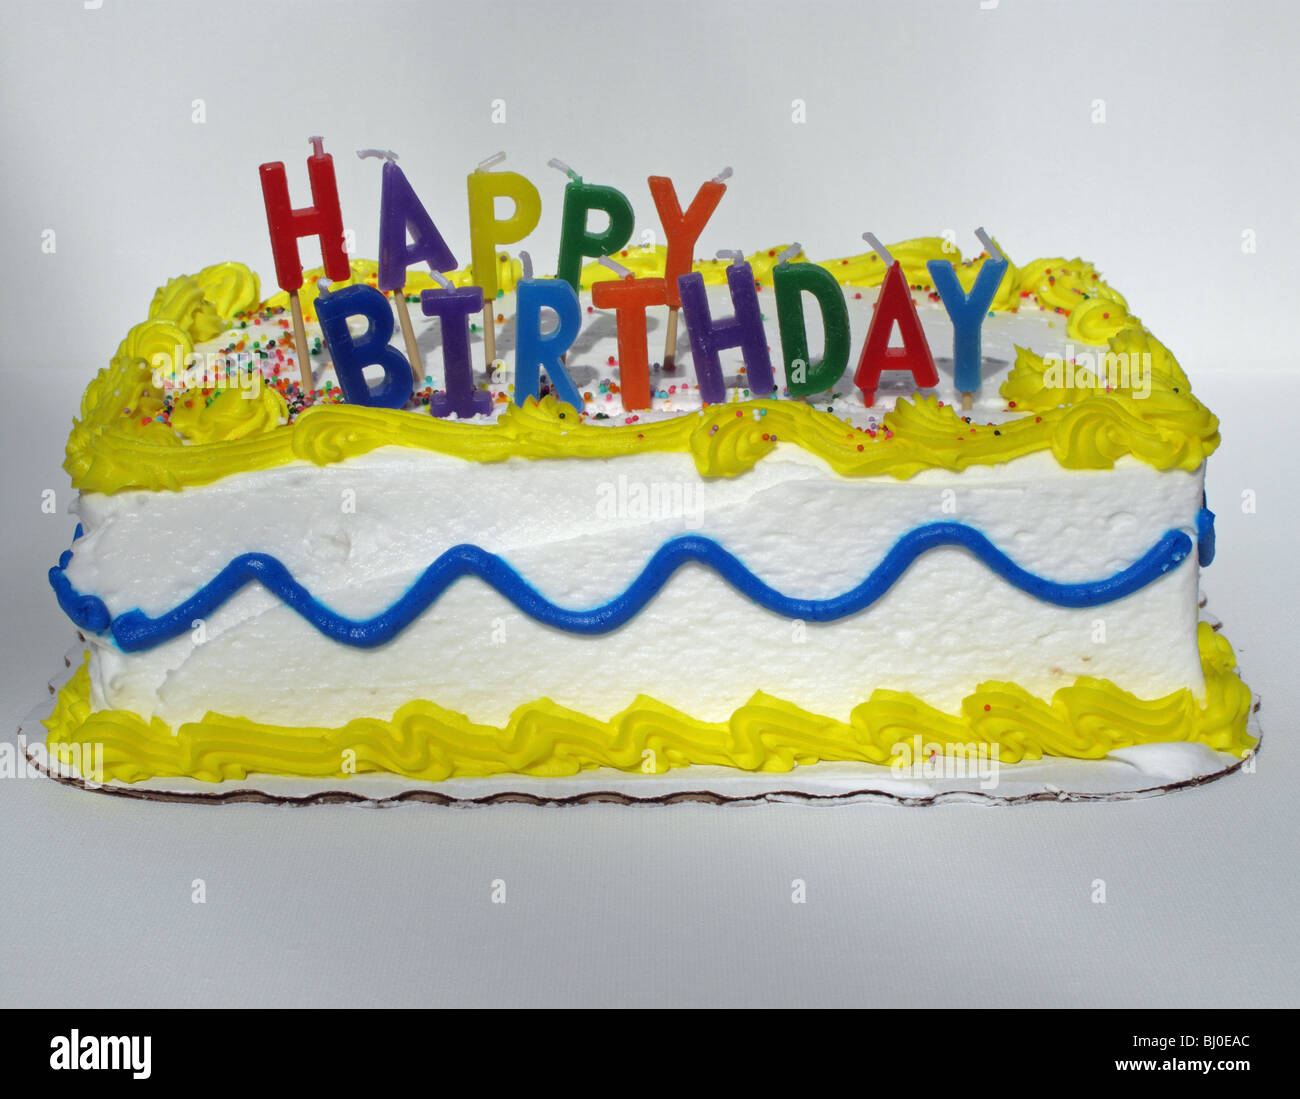 Birthday cake with letter candles Stock Photo